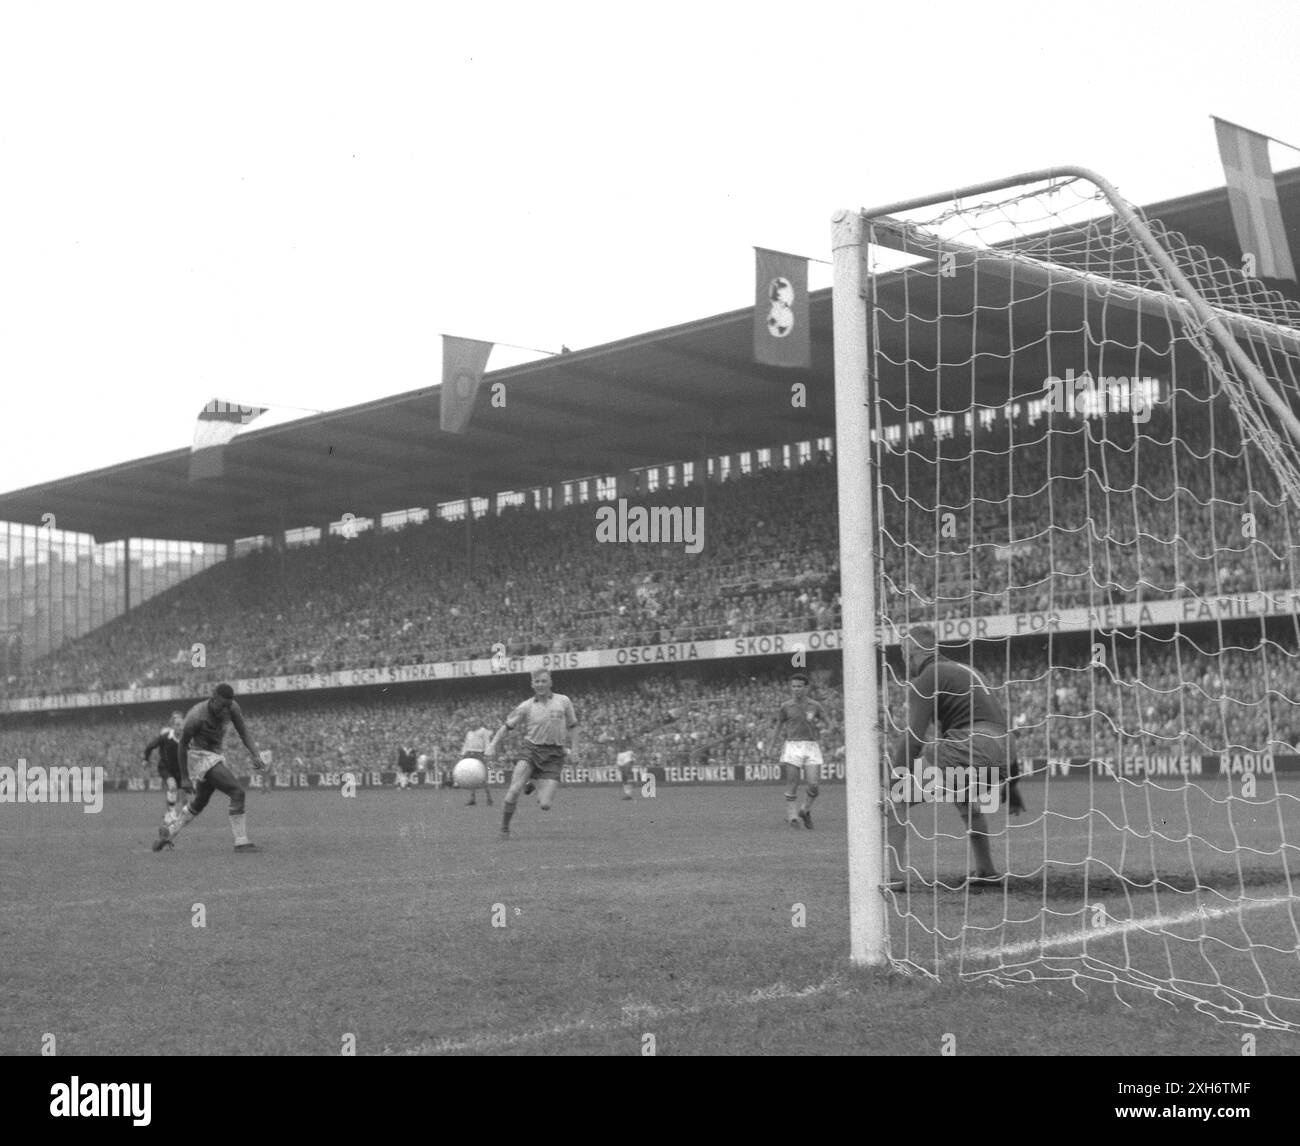 1958 World Cup in Sweden: Final Brazil - Sweden 29.06.1958 in Stockholm. Pele (Brazil, left) scores the goal to make the final score 5:2. Right: Tw. Karl Svensson (SWE). [automated translation] Stock Photo